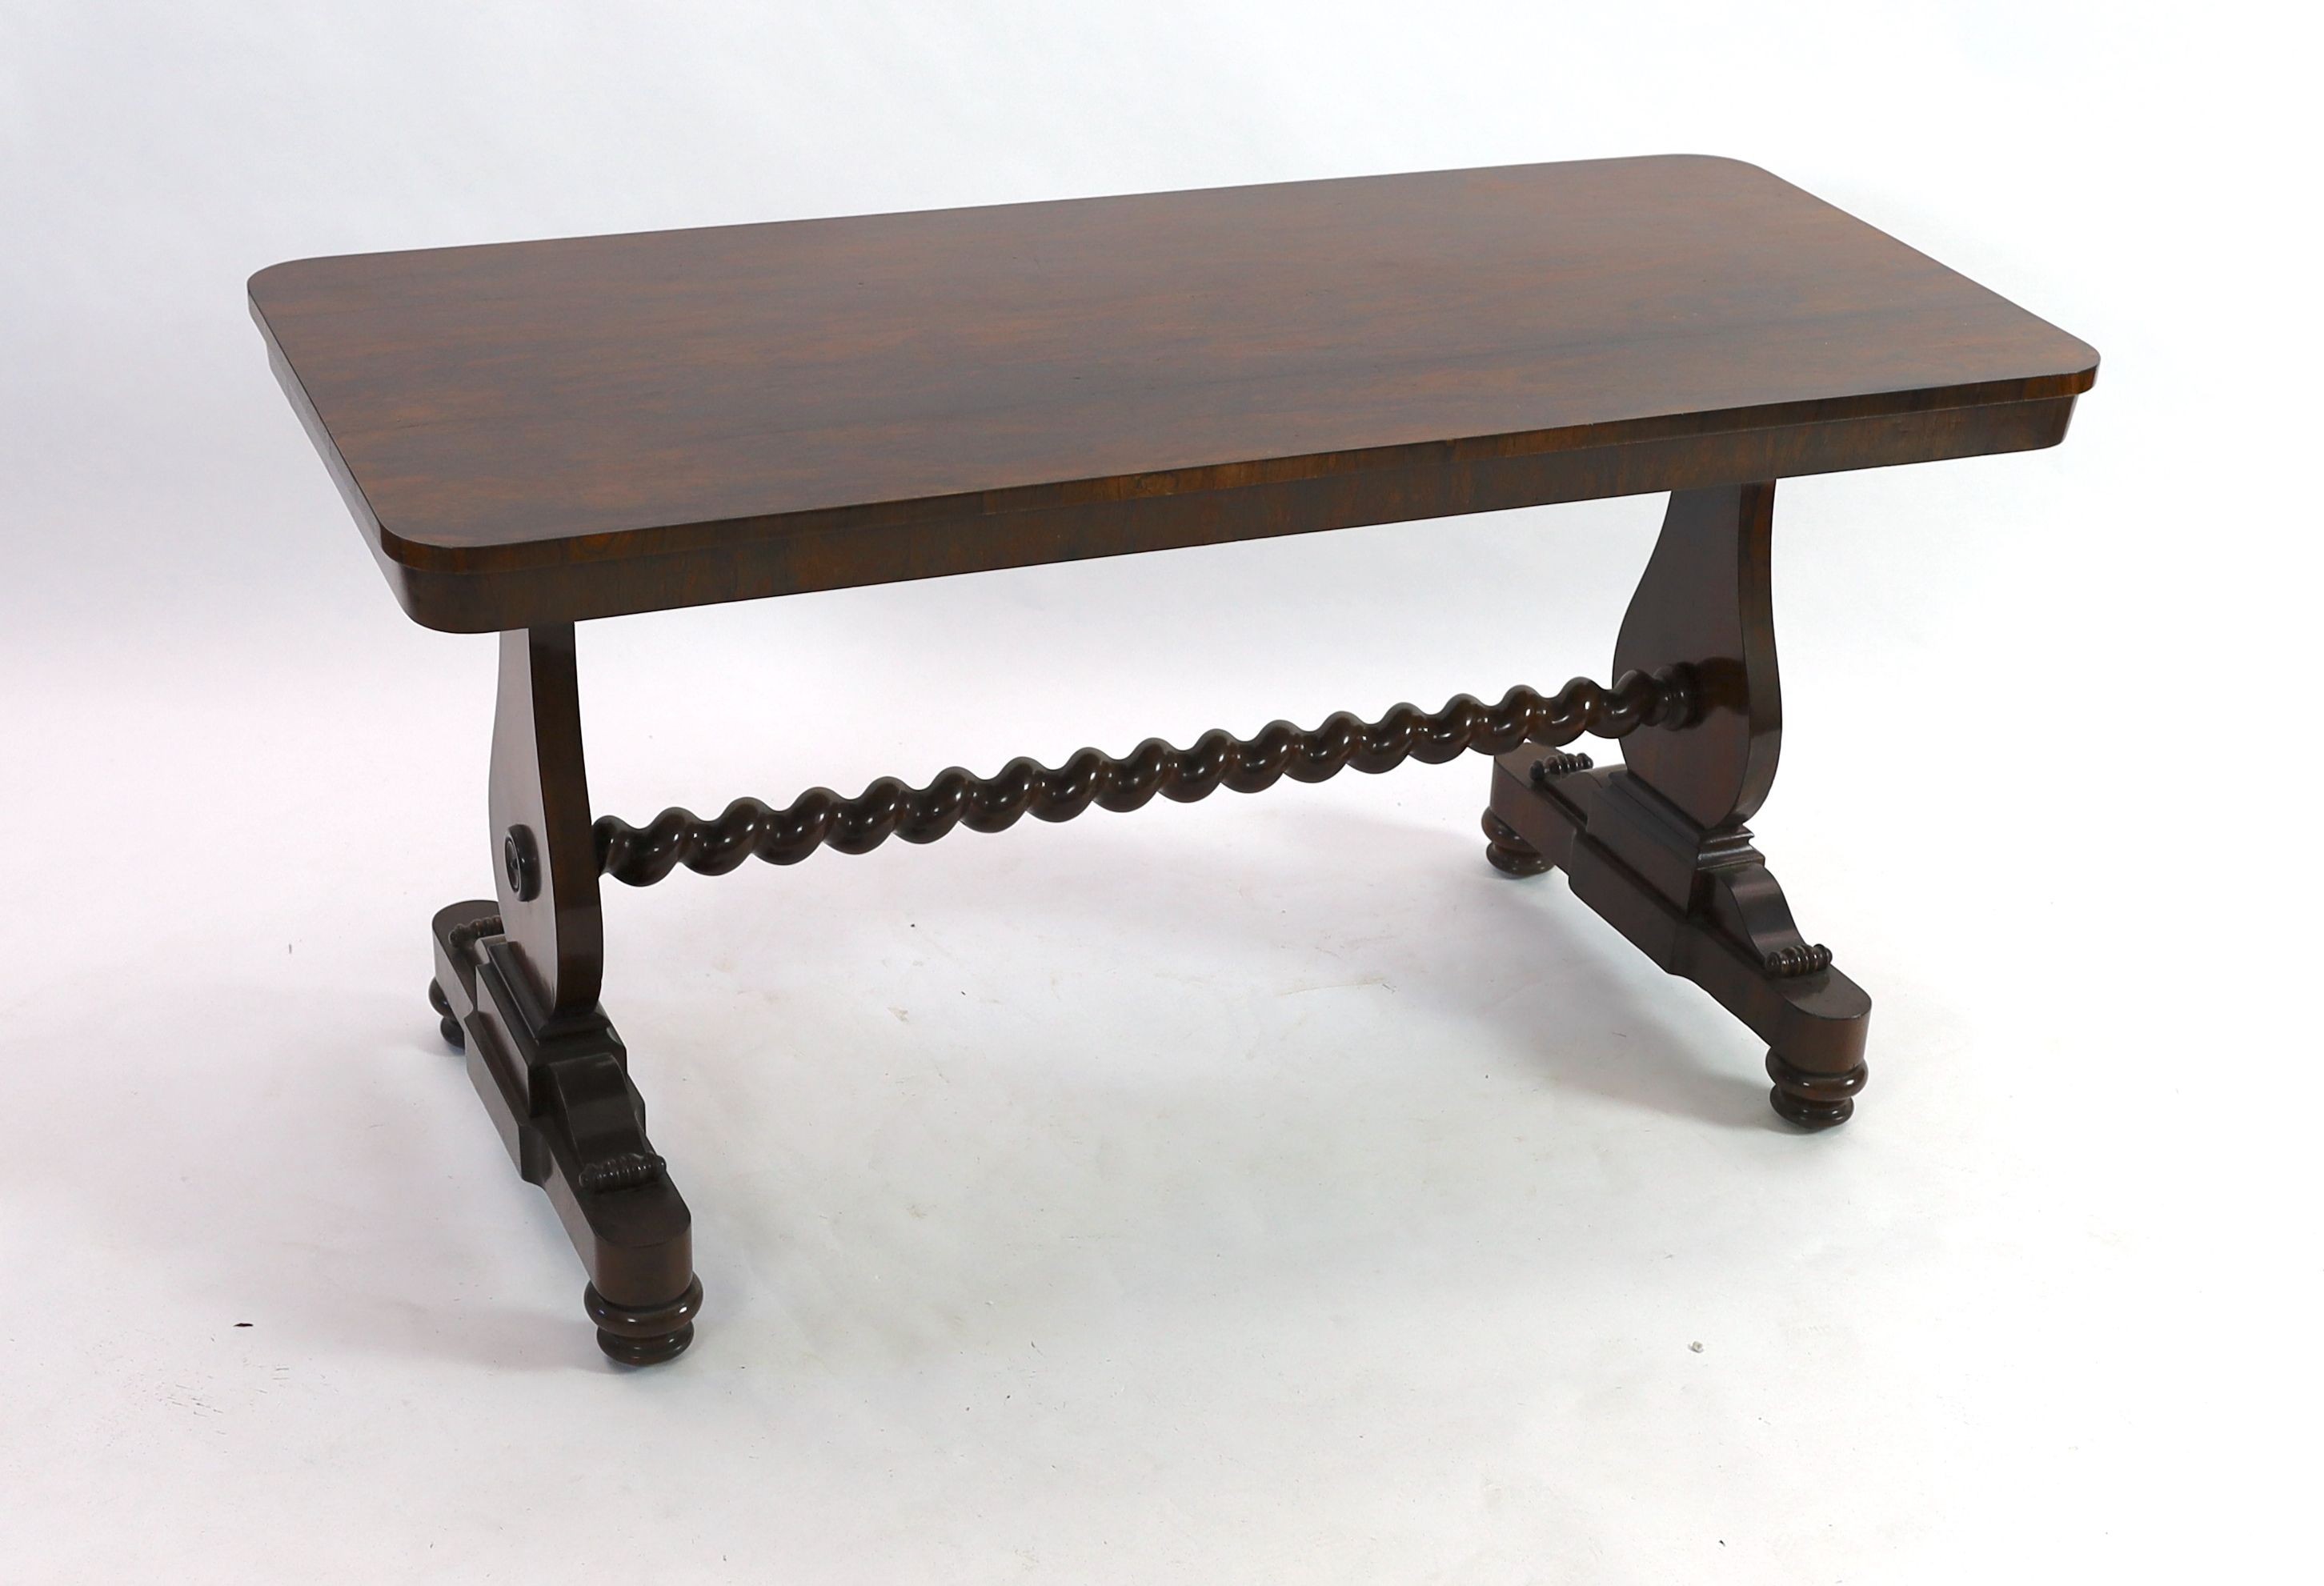 An early Victorian rectangular rosewood centre table, with turned spiral stretcher, width 147cm depth 66cm height 76cm